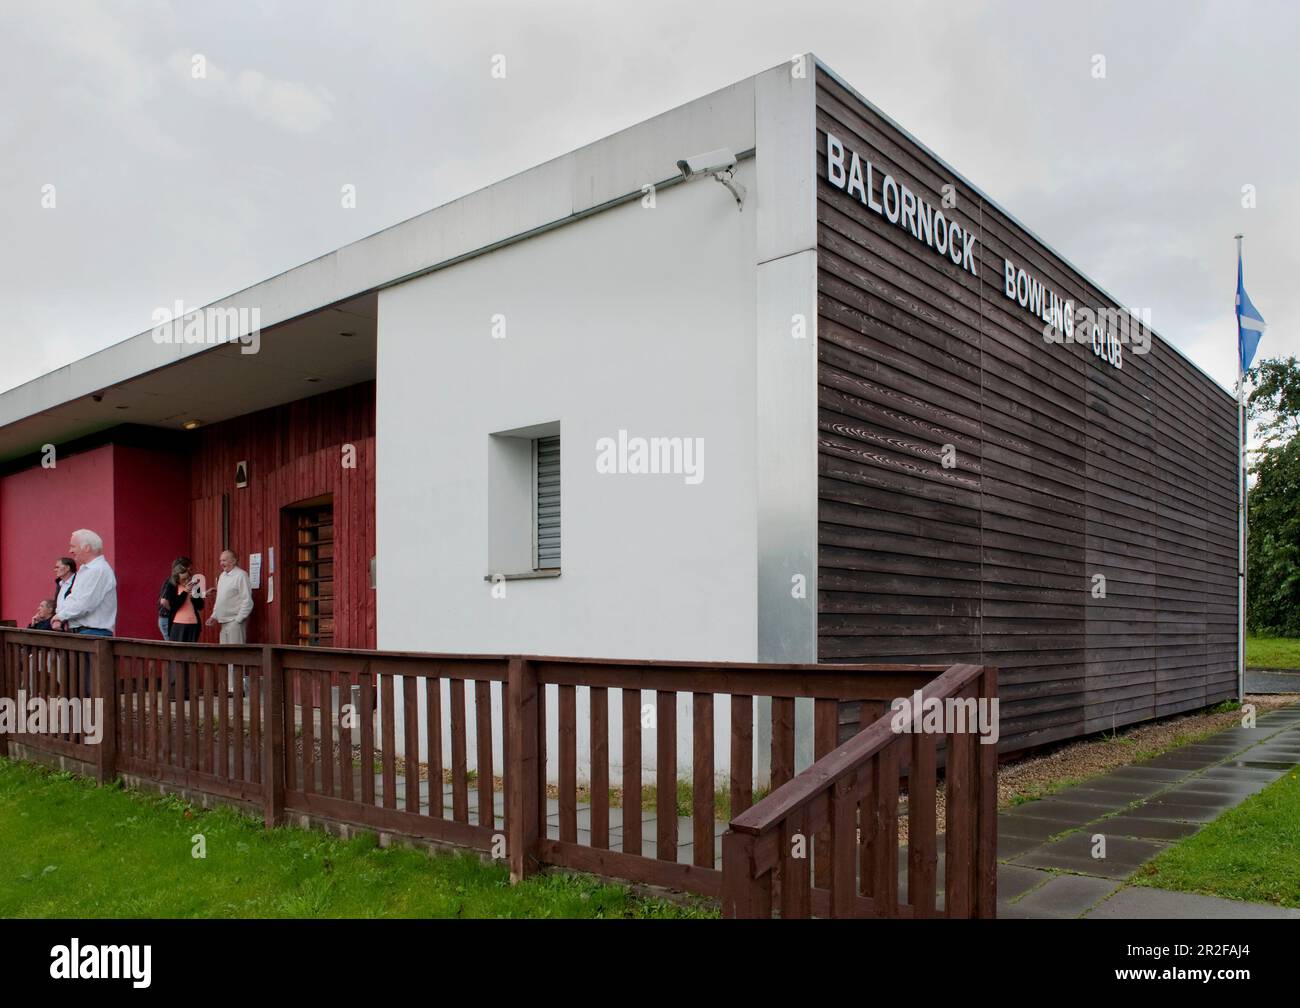 The red pavilion clubhouse at the Balornock lawn bowling green in Glasgow, Scotland, UK Stock Photo